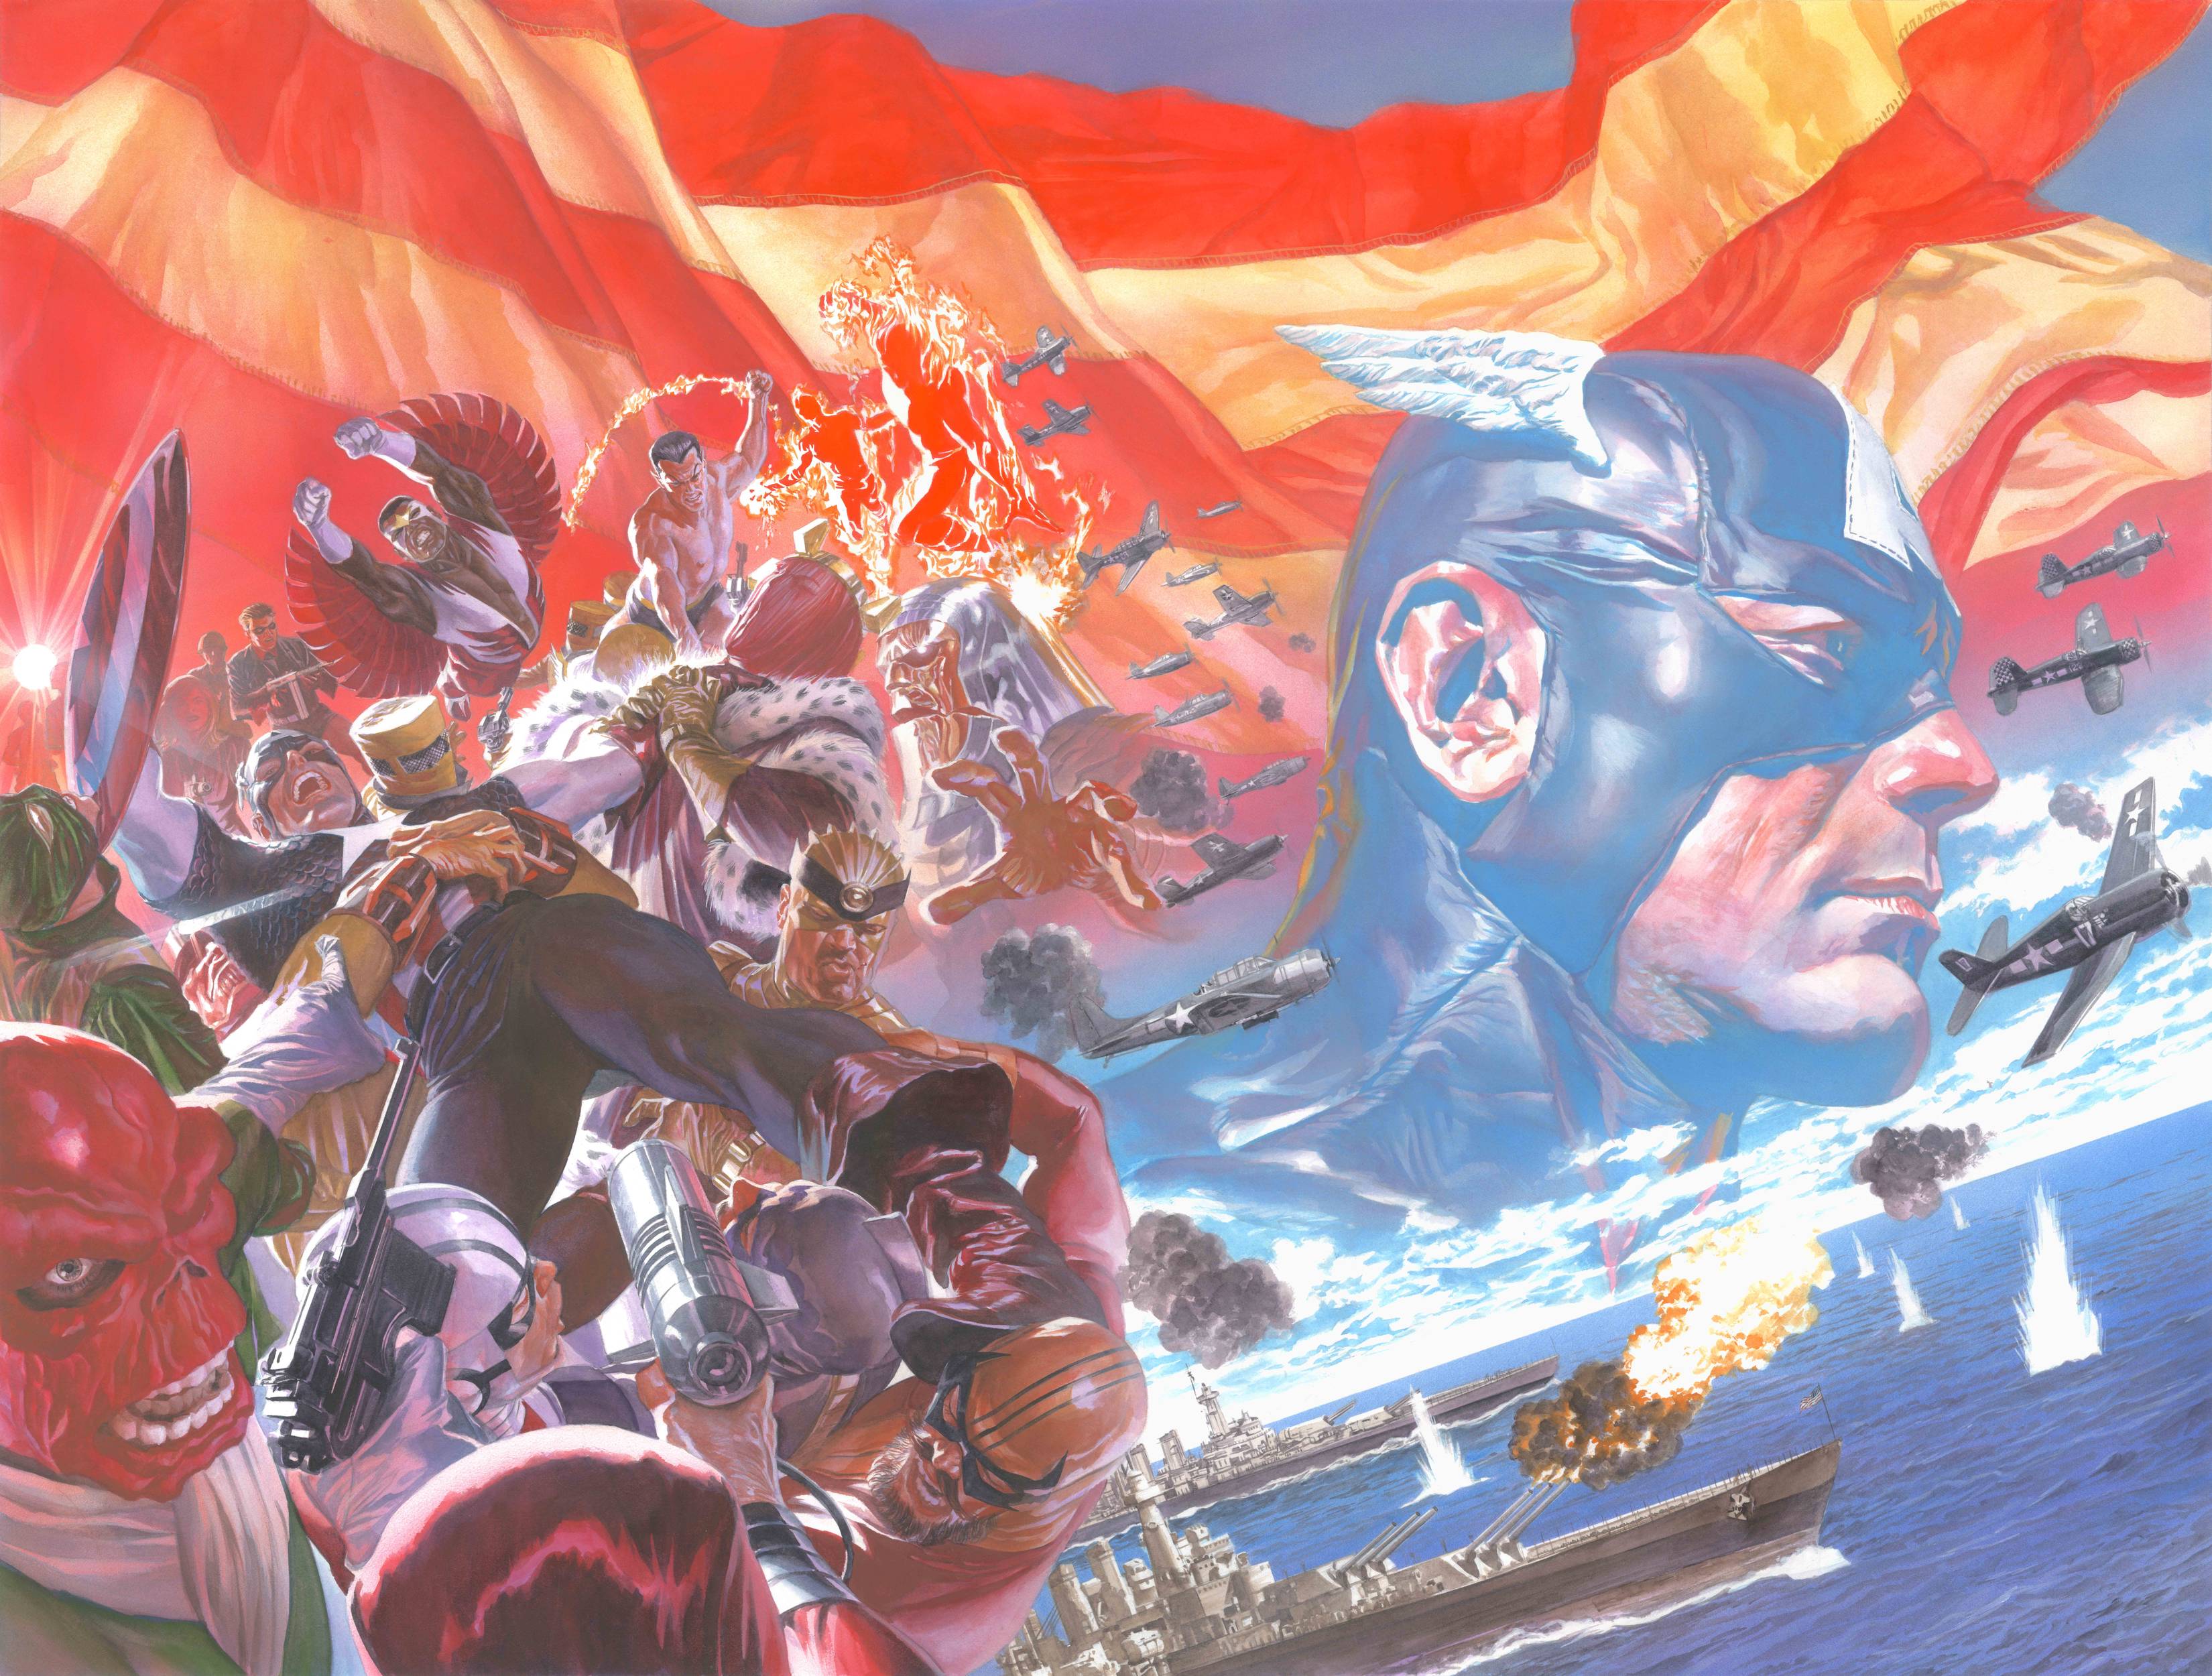 Captain America #1 by Ross Poster